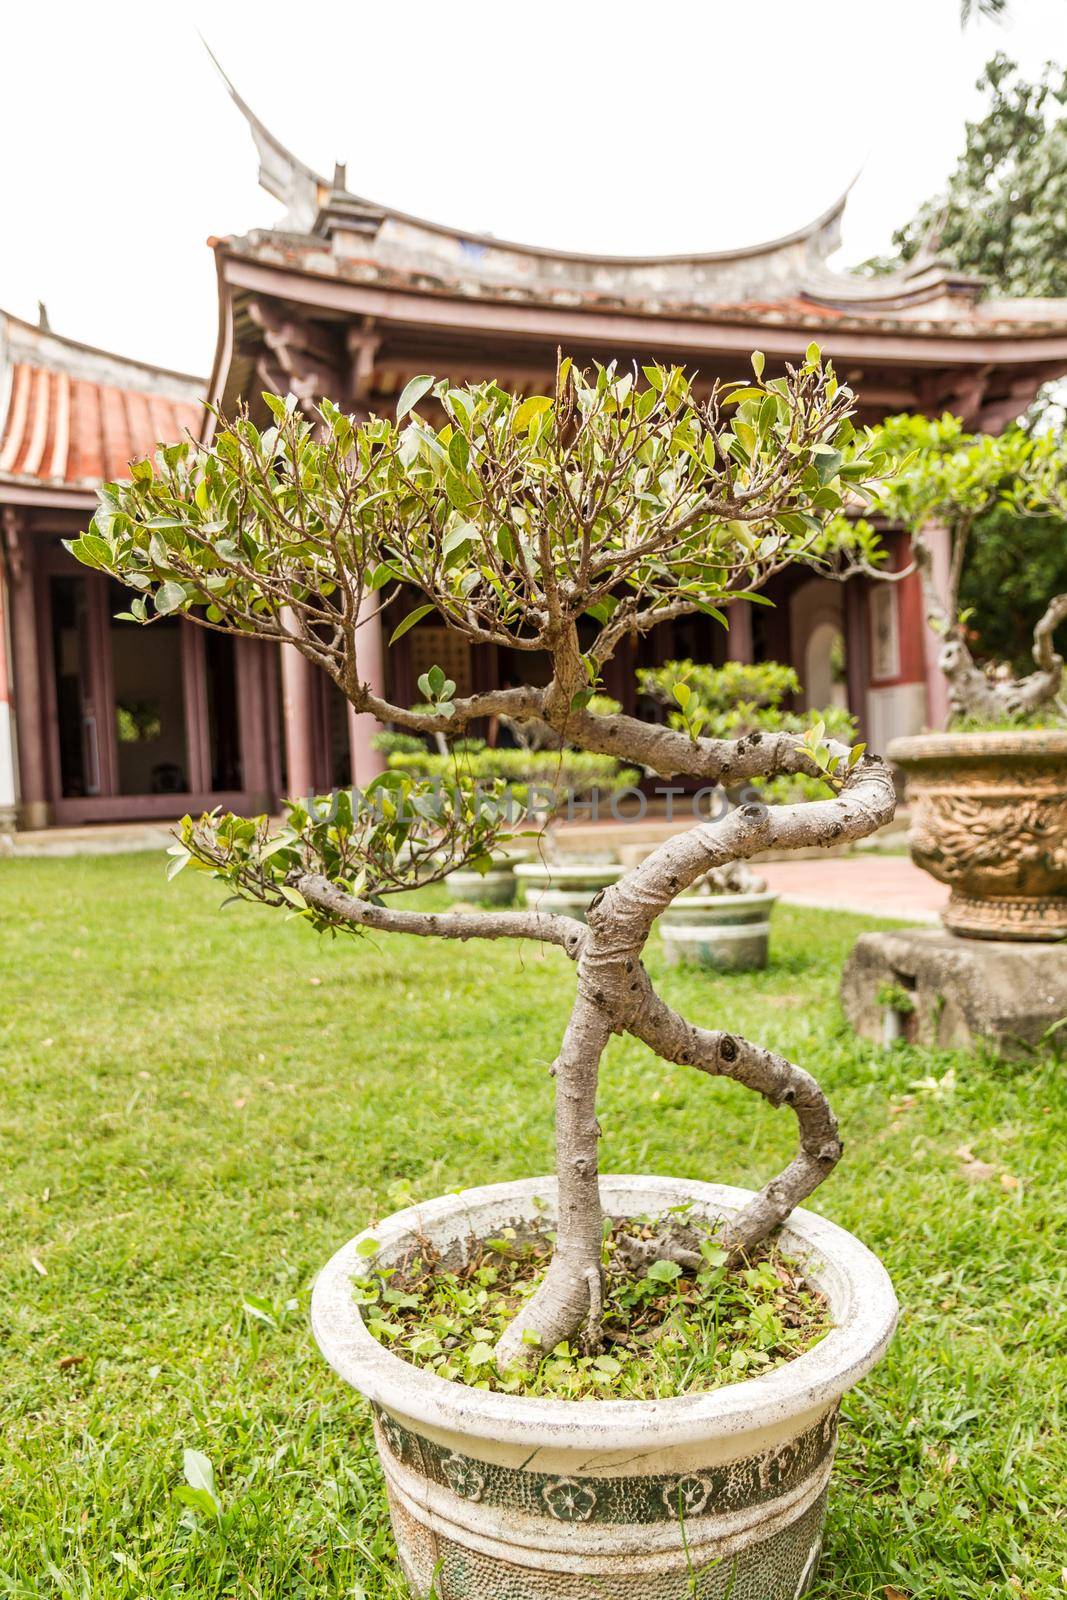 A Confuscius temple with bonsai plansts in front